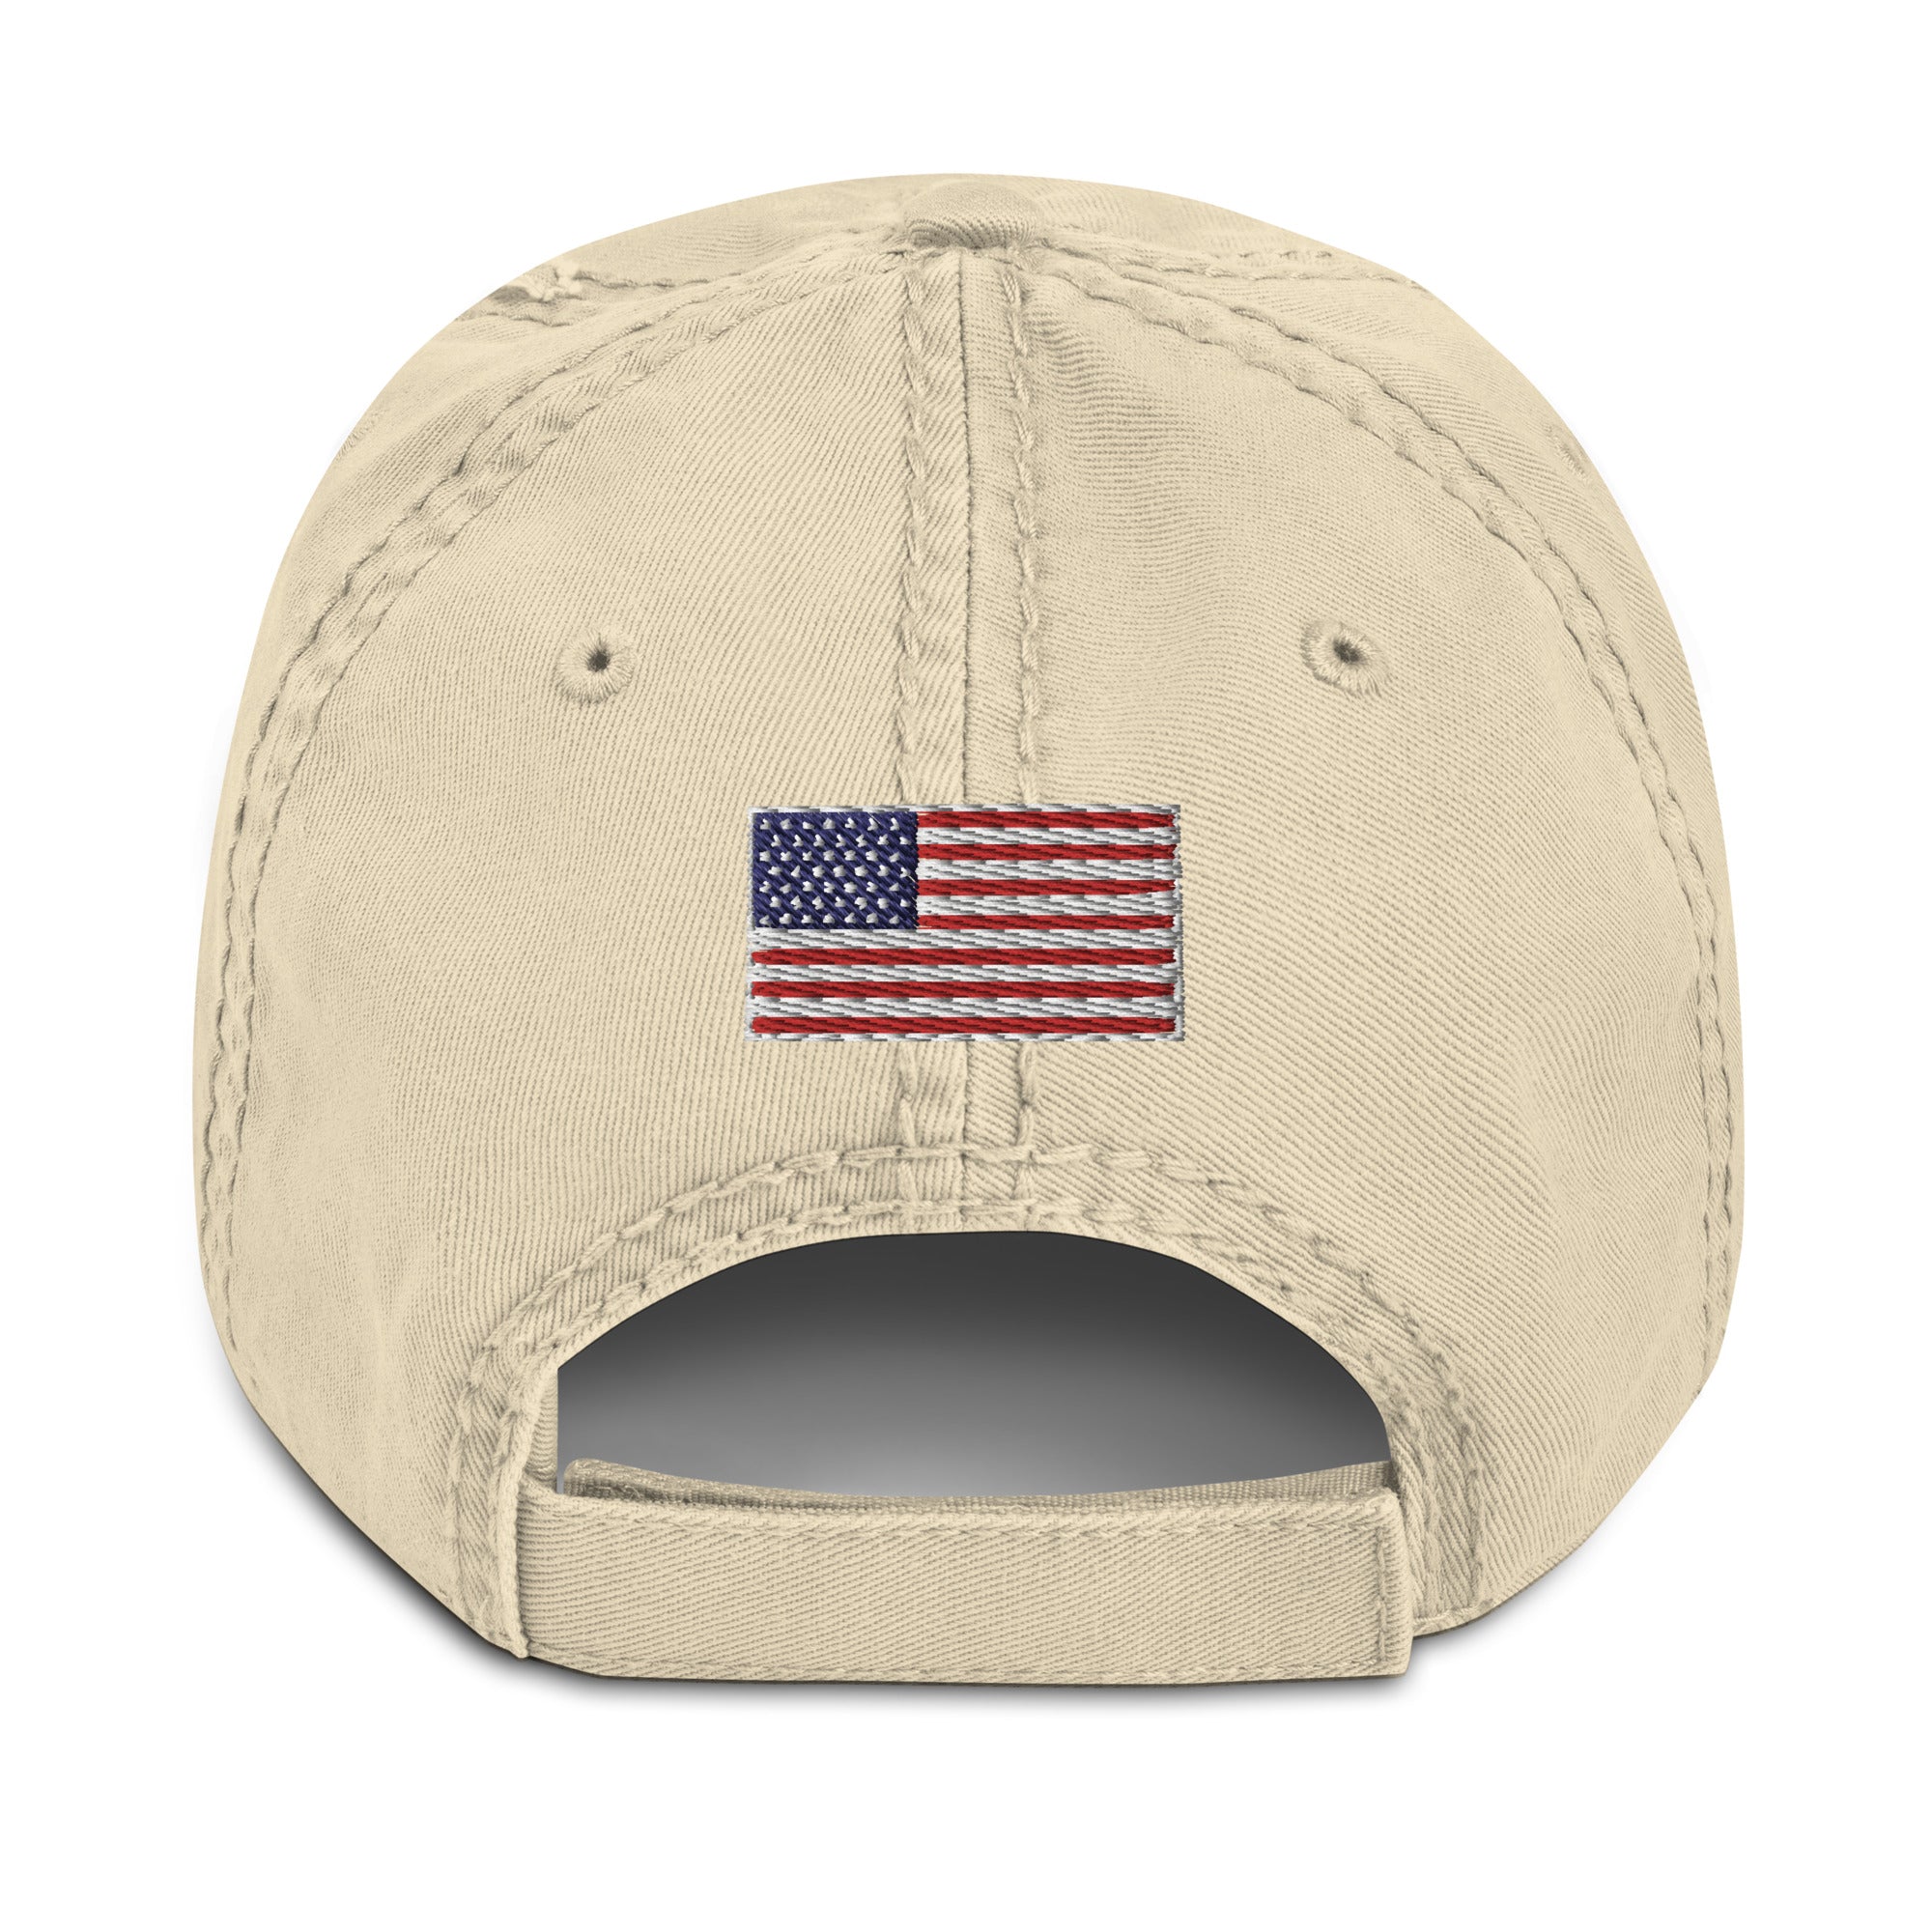 The Musa Blades Distressed Dad Hat